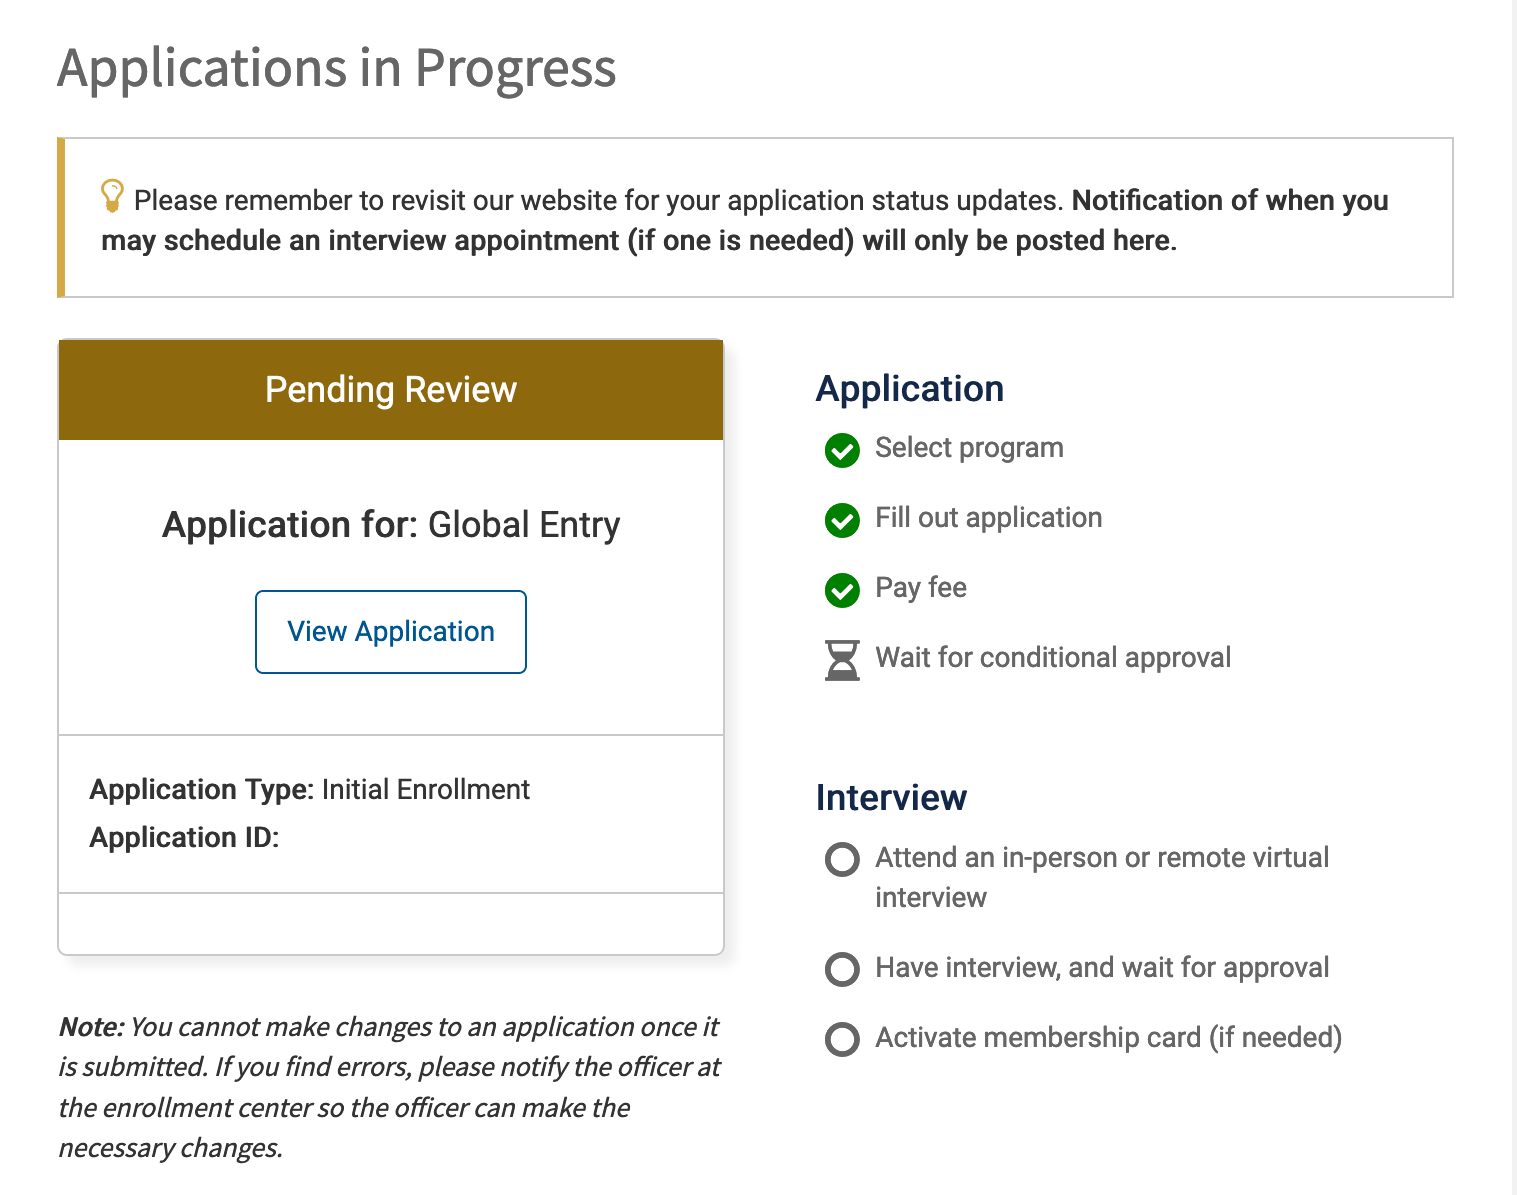 How to apply for Global Entry Program for Indian citizens holding a